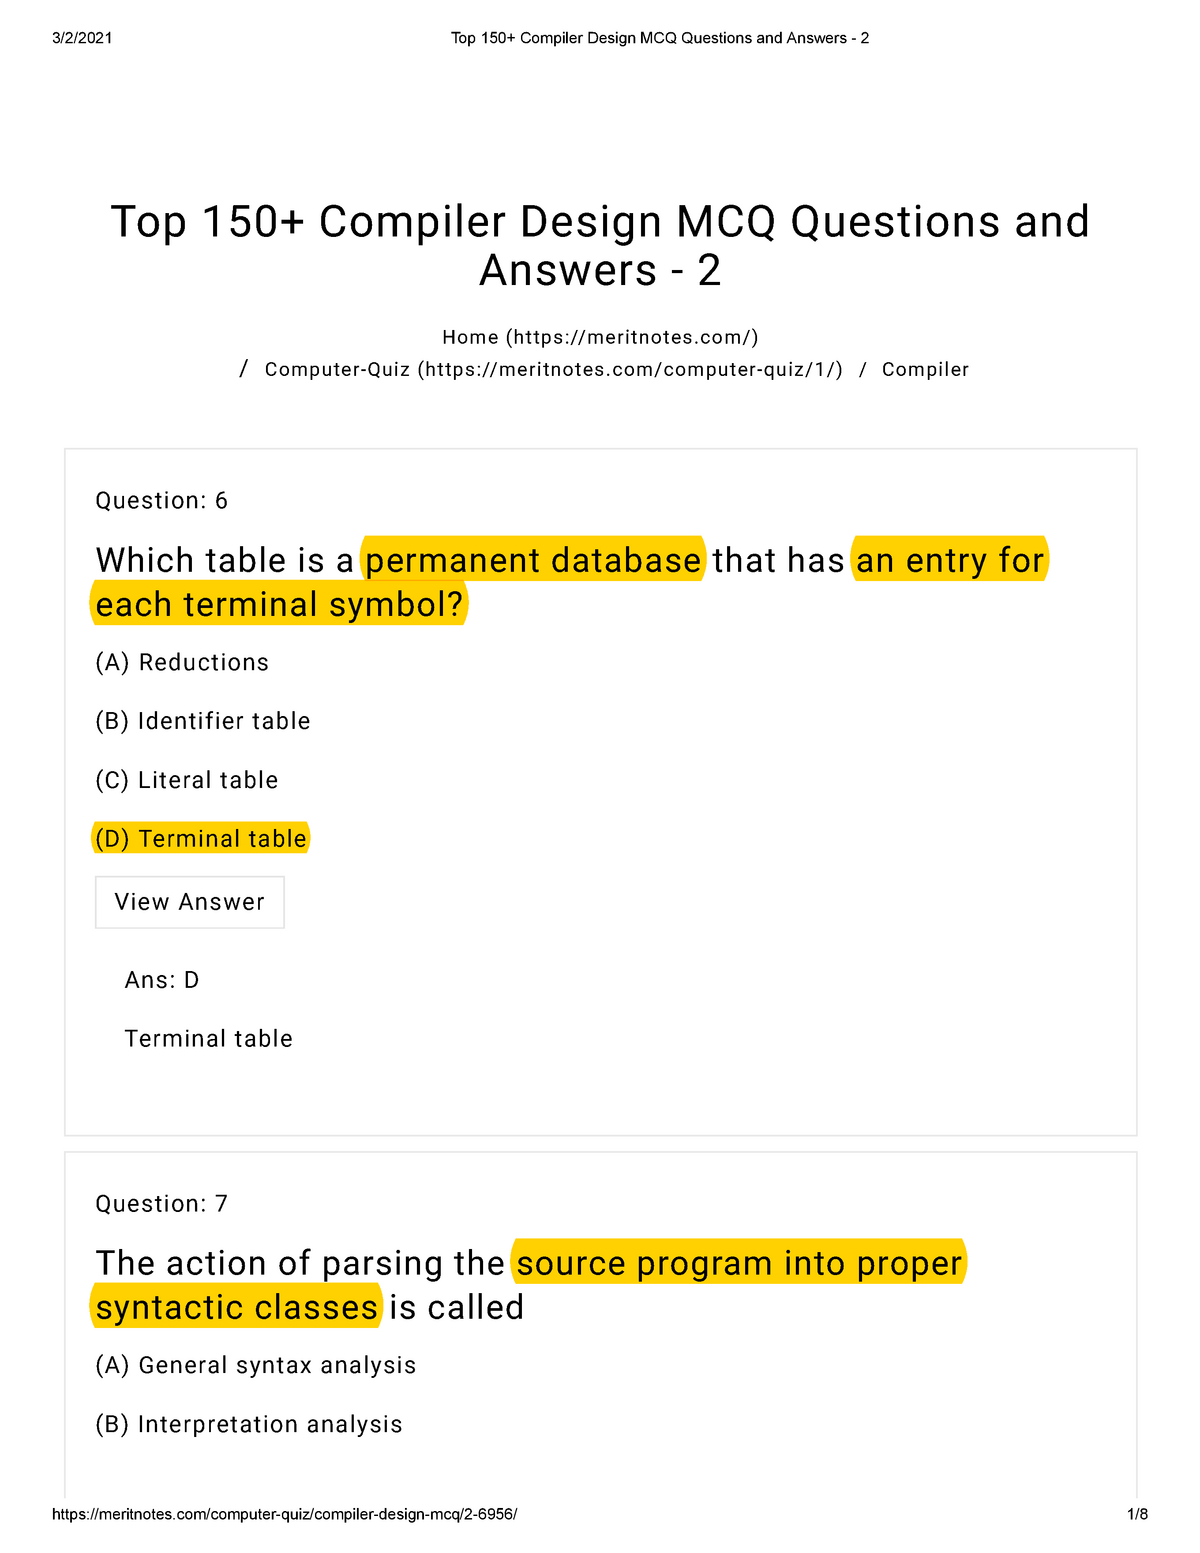 research design mcq questions and answers